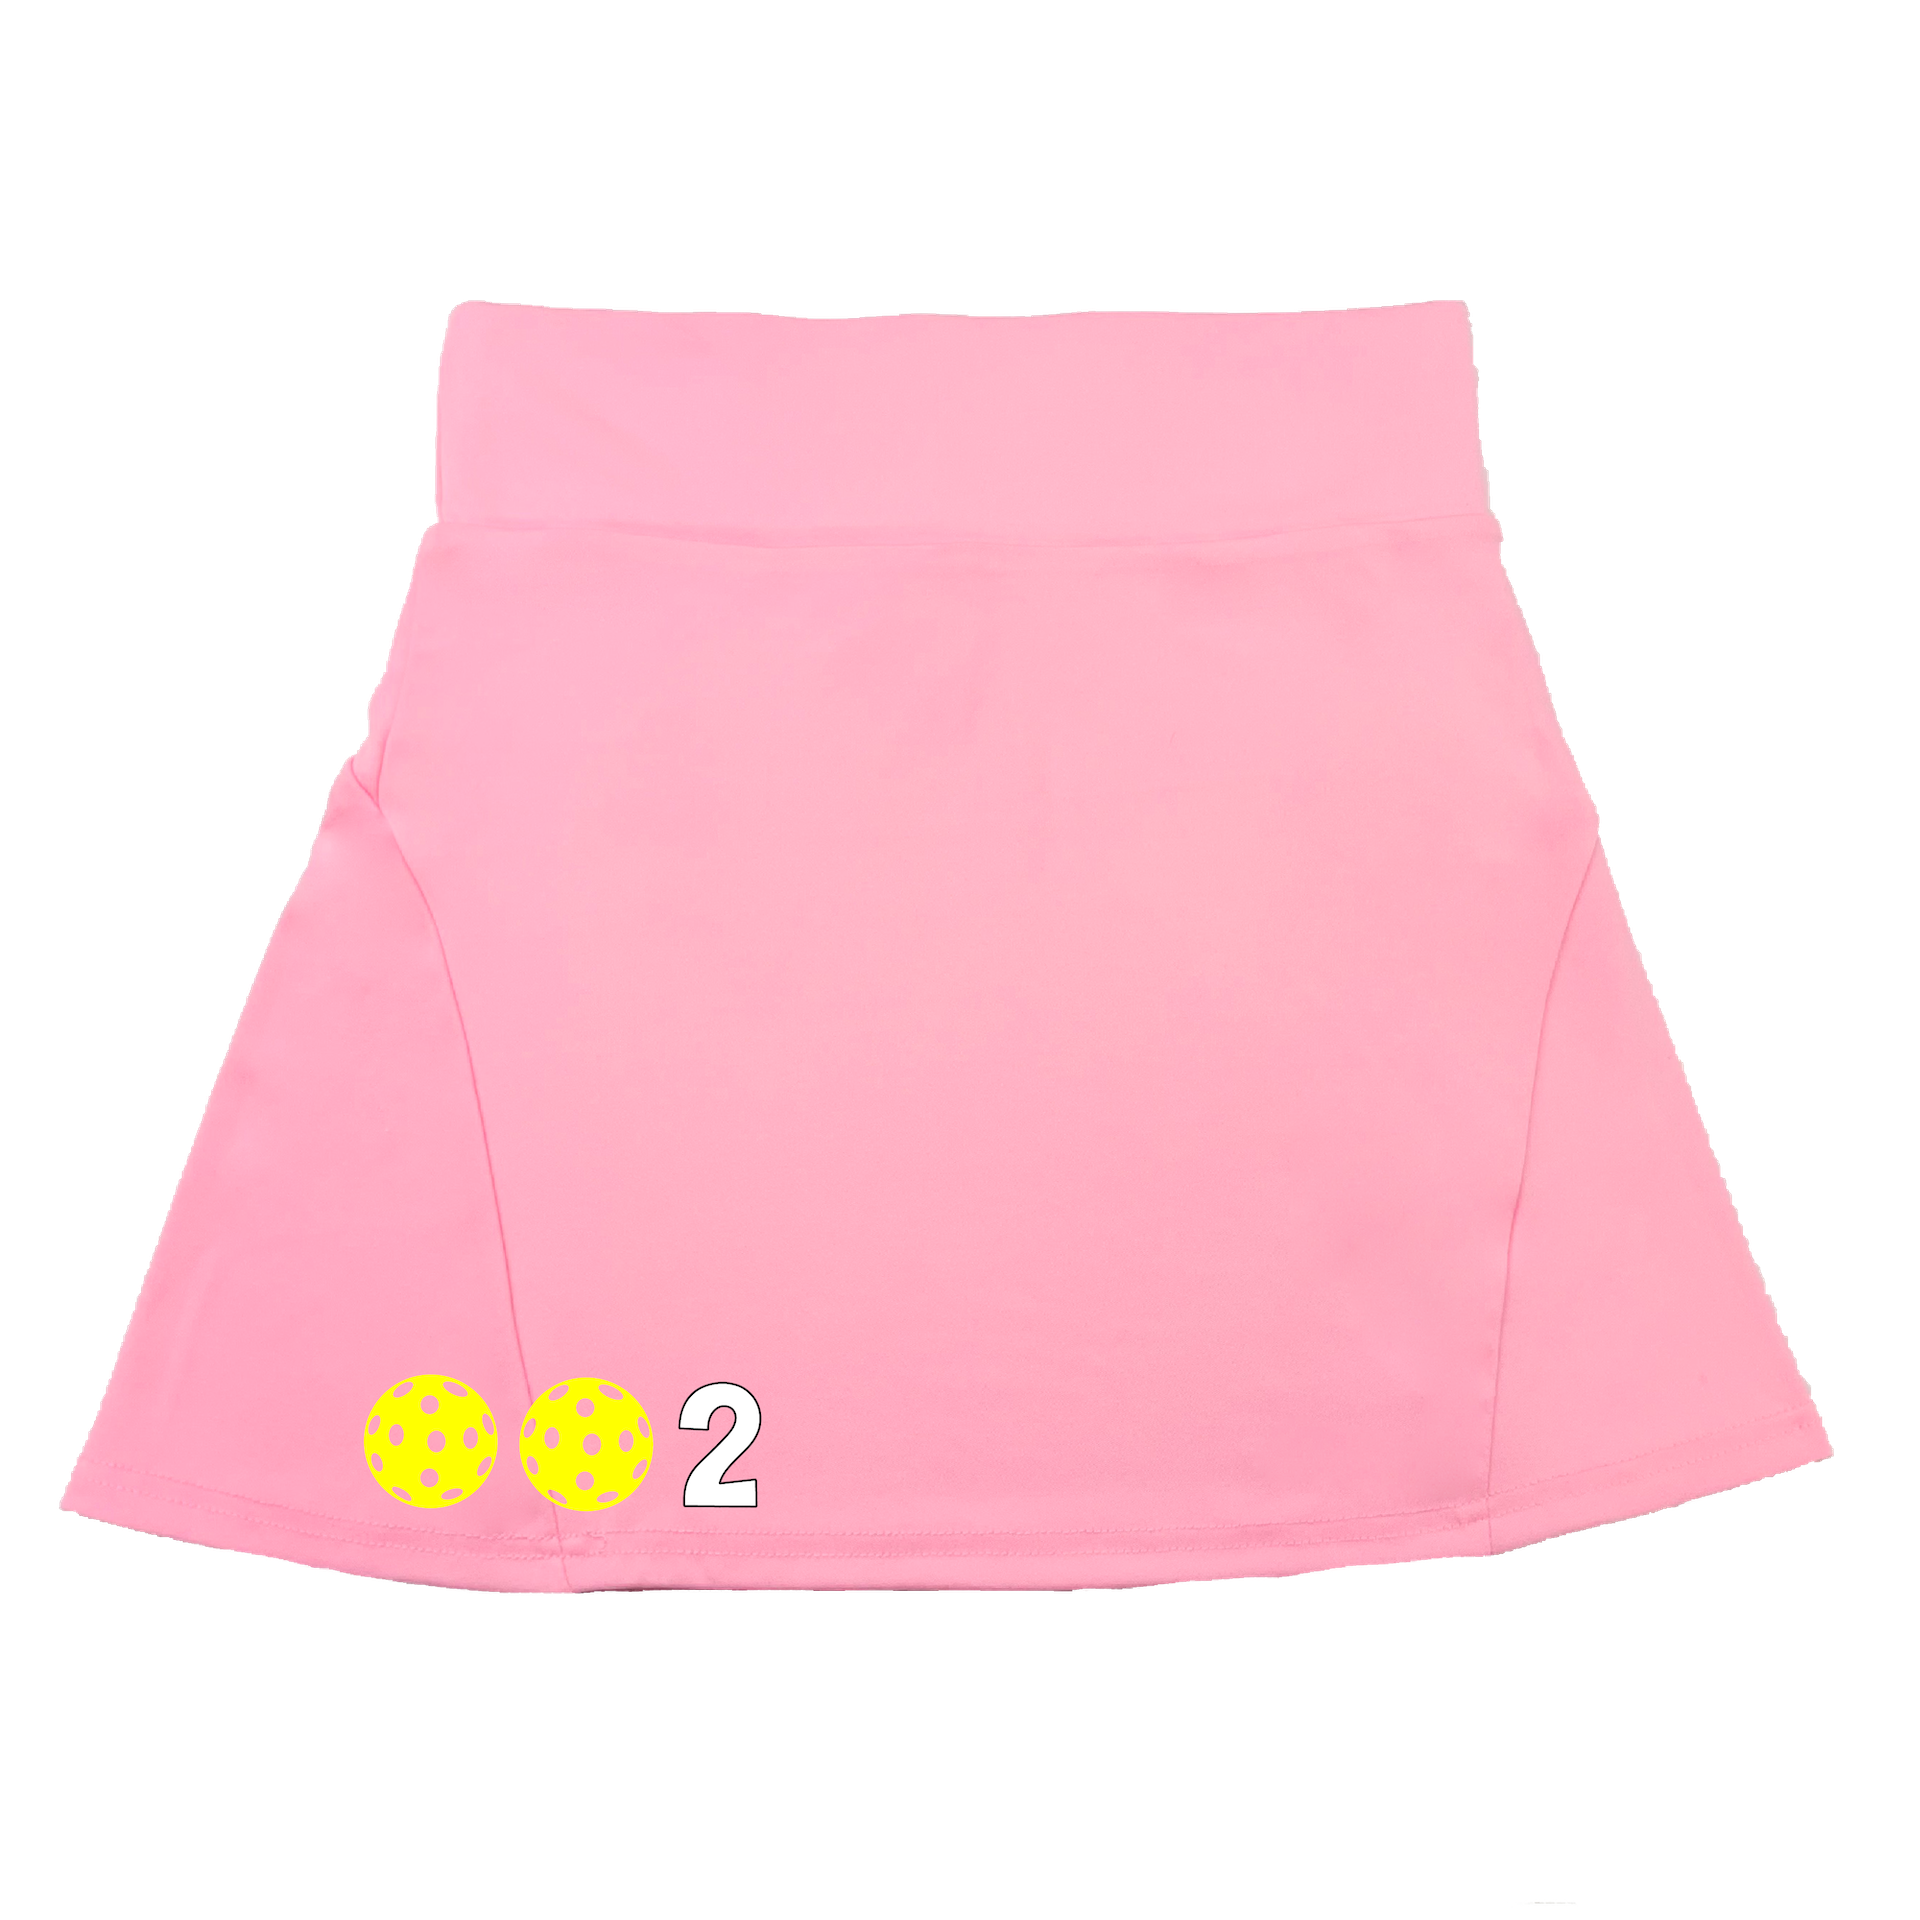 Pickleball Flirty Skort Design: 002 Customizable Pickleball Ball color:  Choose: White, Yellow or Pink.  These flirty skorts have a flat mid-rise waistband with a 3-inch waistband.  Light weight without being see through and the material wicks away moisture quickly.  Flirty pleats in the back with inner shorts for free movement and stylish coverage on the courts.  A functional zipper pocket on the back and two built in pockets on the shorts for convenient storage. 